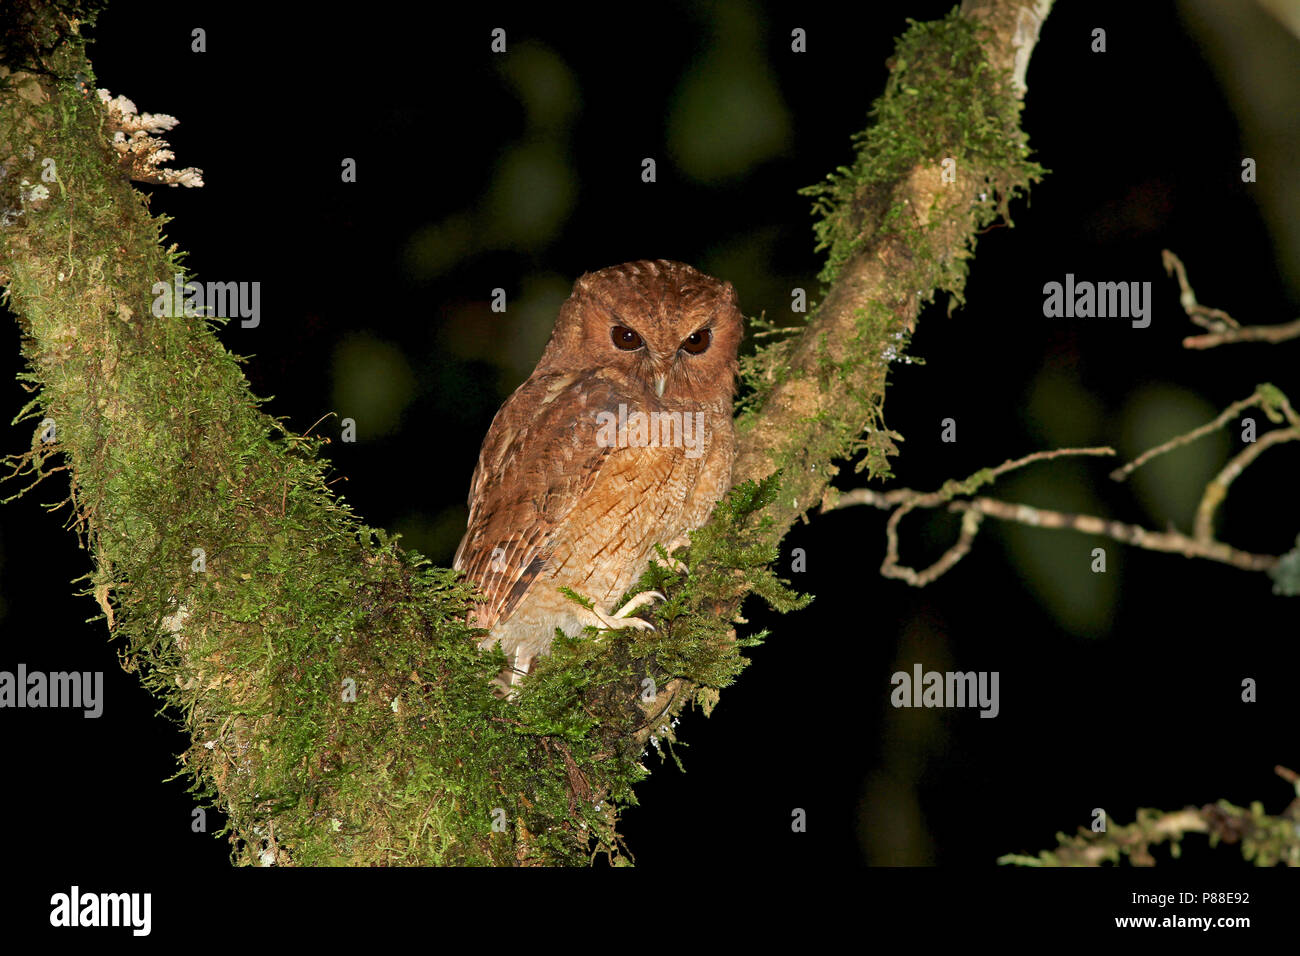 Colombian Screech Owl (Megascops colombianus) during the night in Colombia. Stock Photo